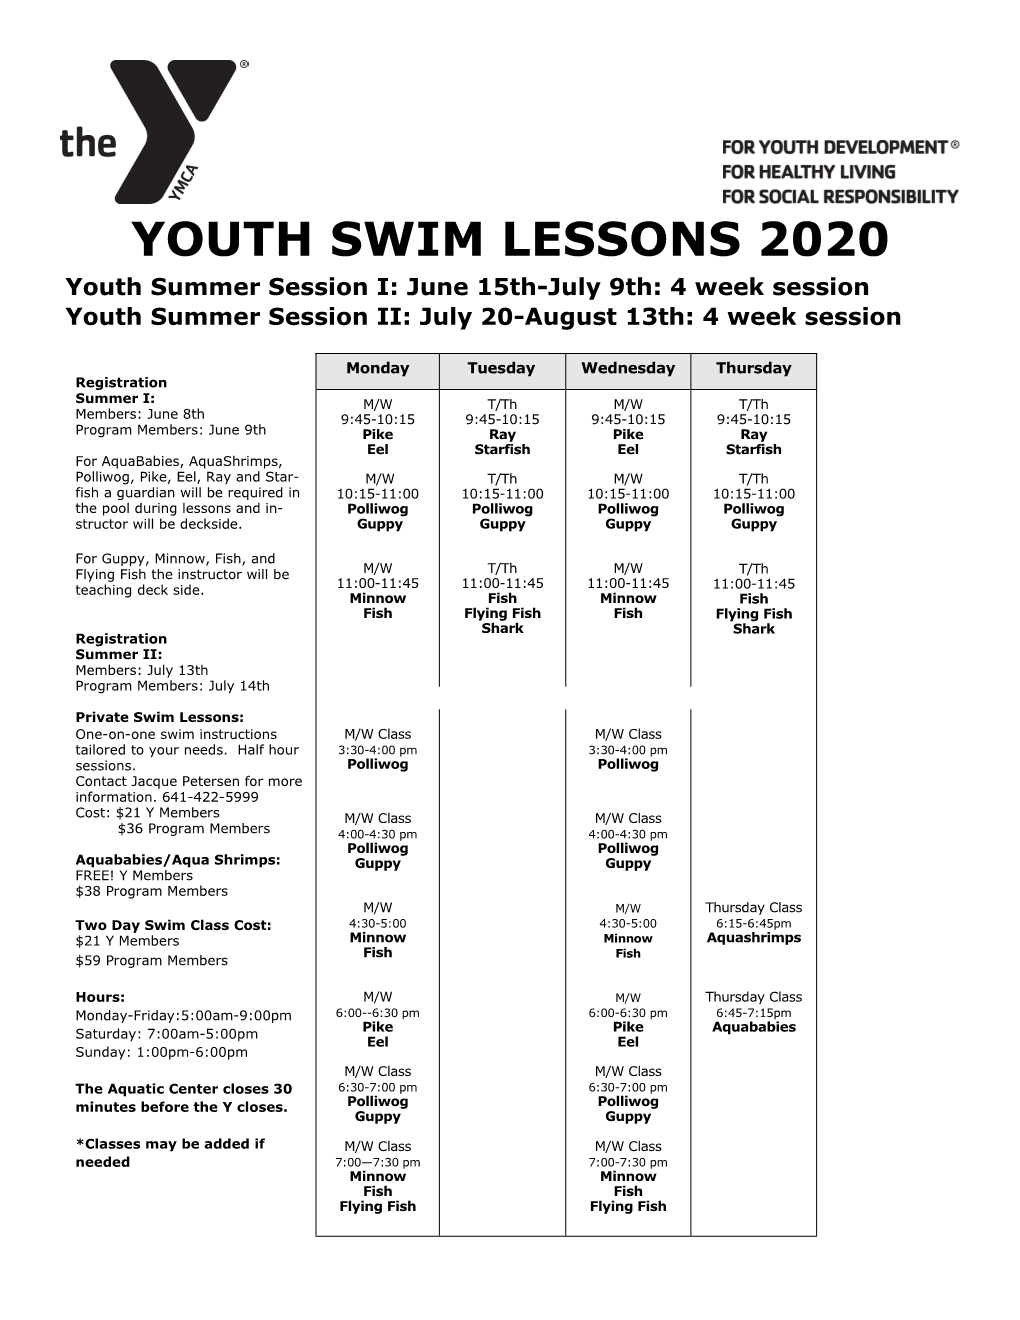 YOUTH SWIM LESSONS 2020 Youth Summer Session I: June 15Th-July 9Th: 4 Week Session Youth Summer Session II: July 20-August 13Th: 4 Week Session